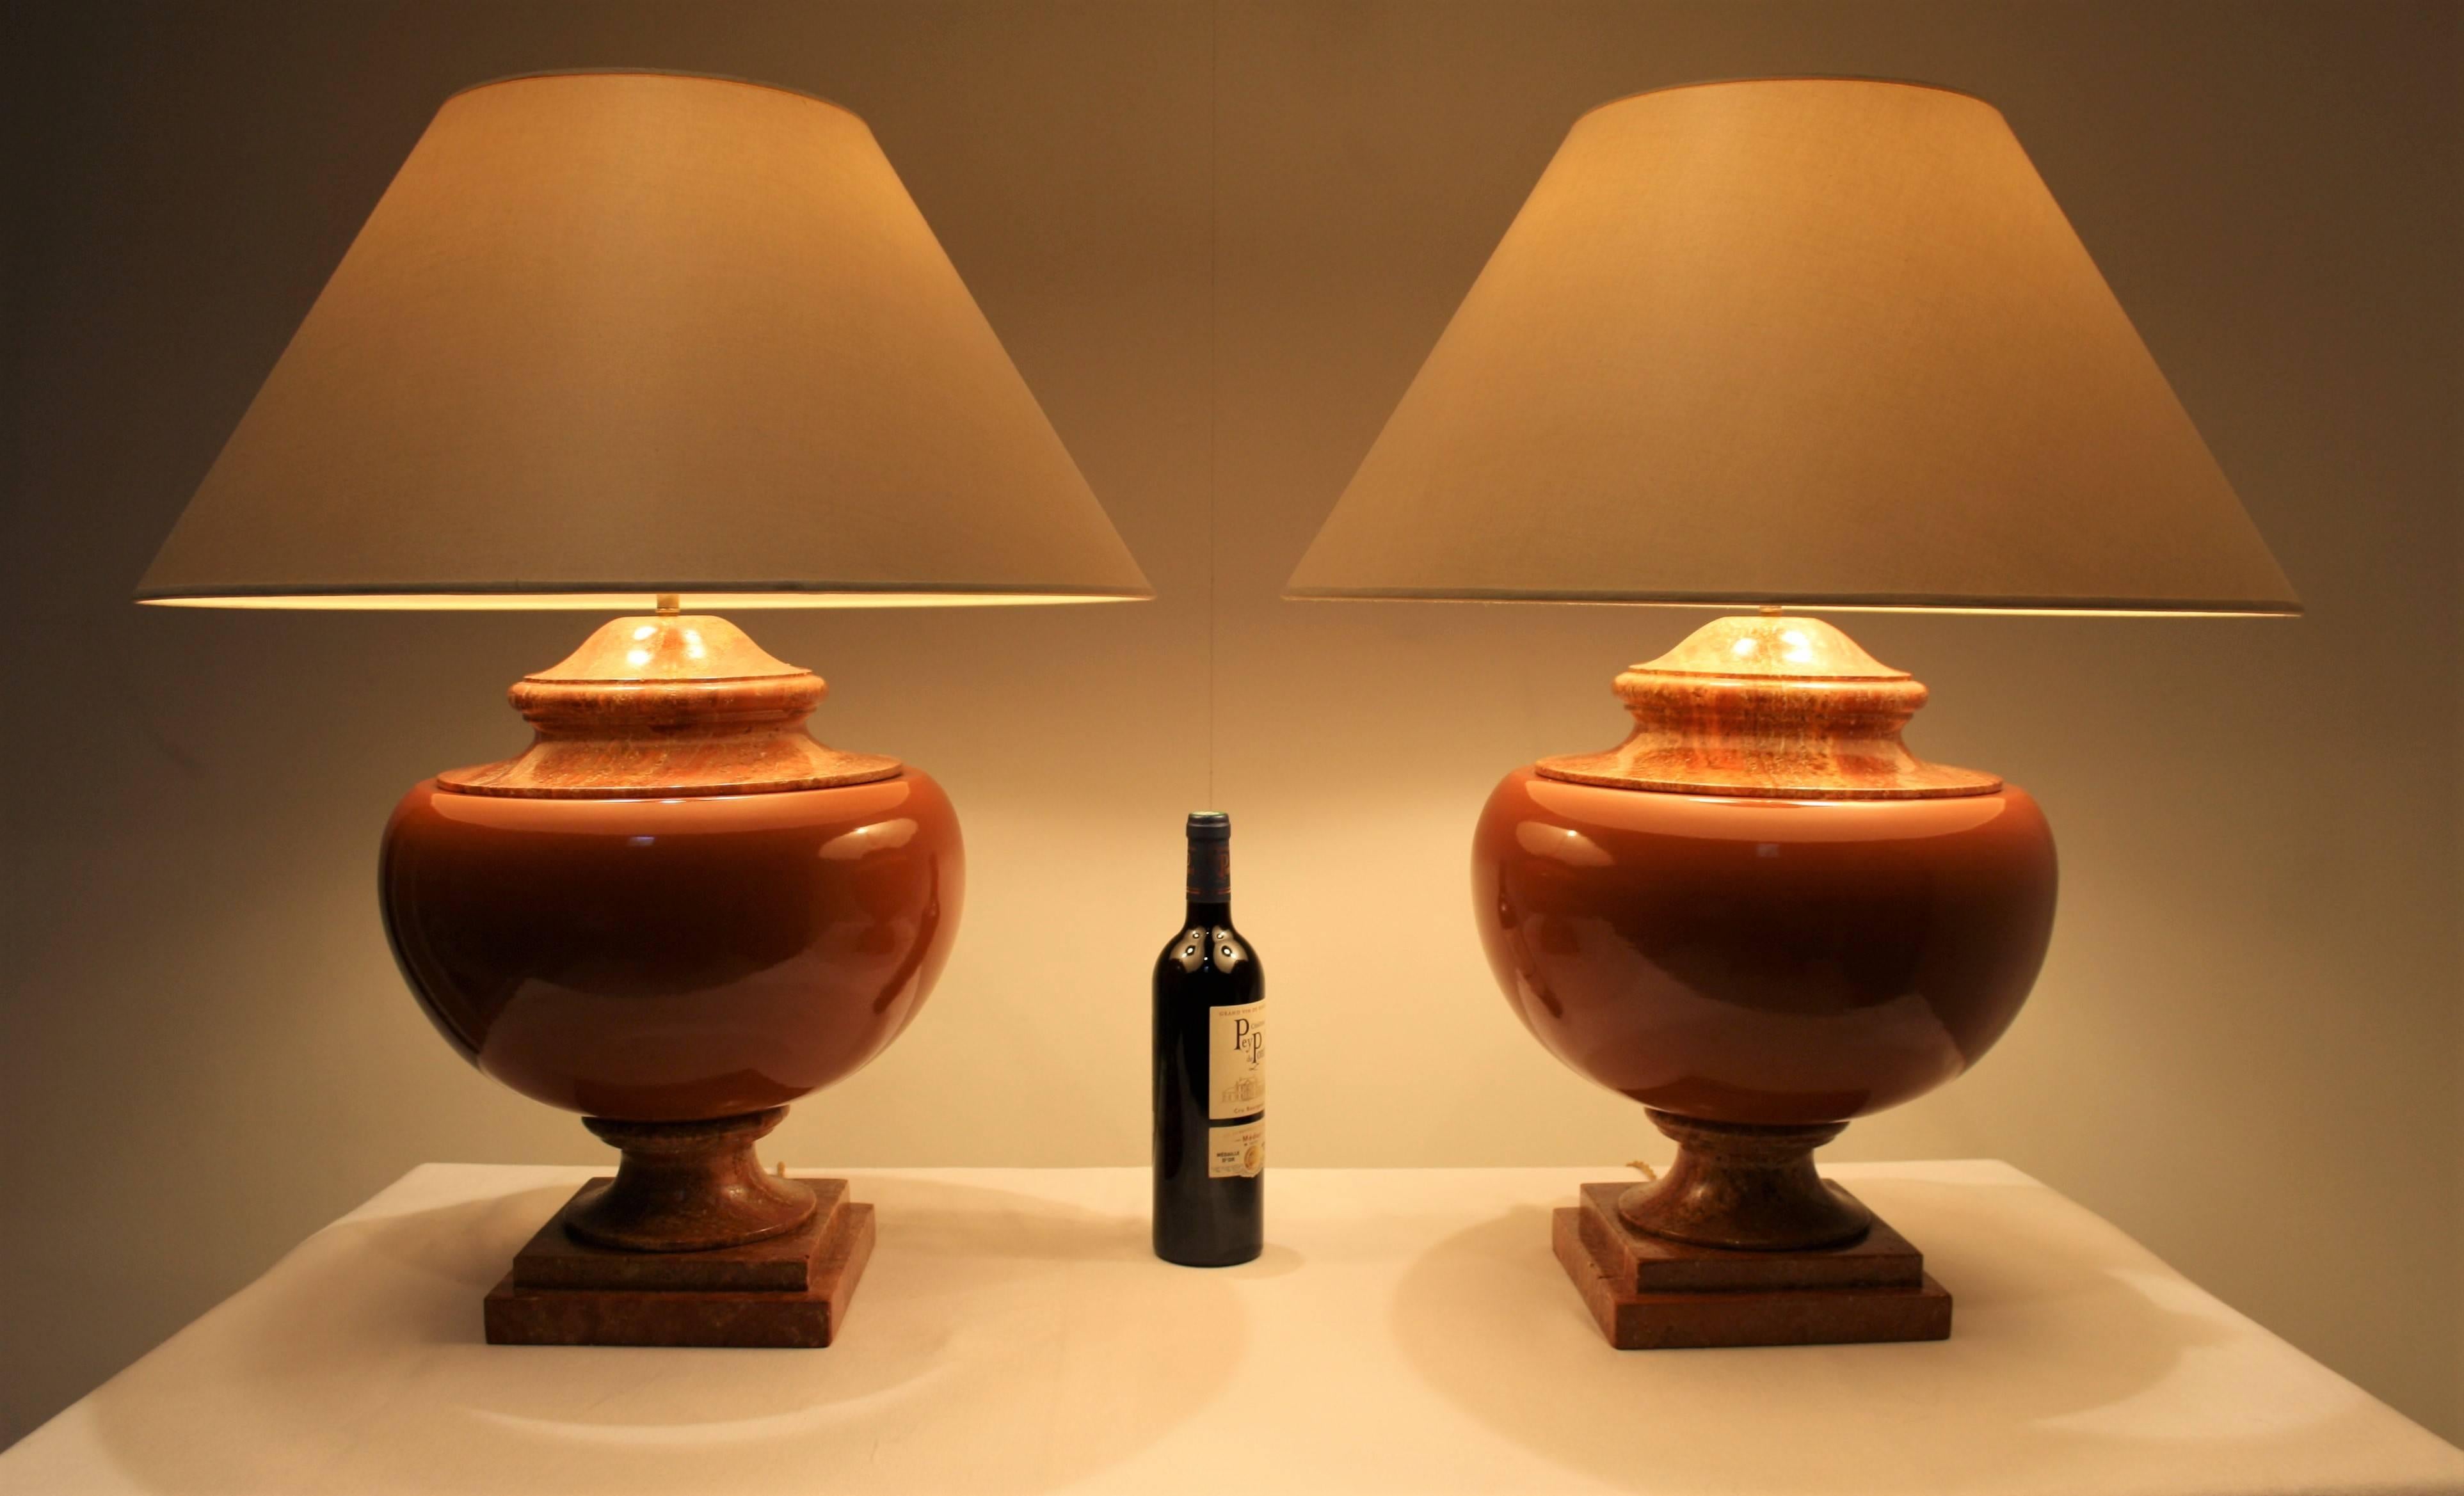 The foot and top are made of red travertine and the middle is made of enameled terracotta.
The lampshades are in ivory color in good condition, the dimensions are 23.6 inches (60 cm) diameter and 11.4 inches (29 cm) high.
They have been